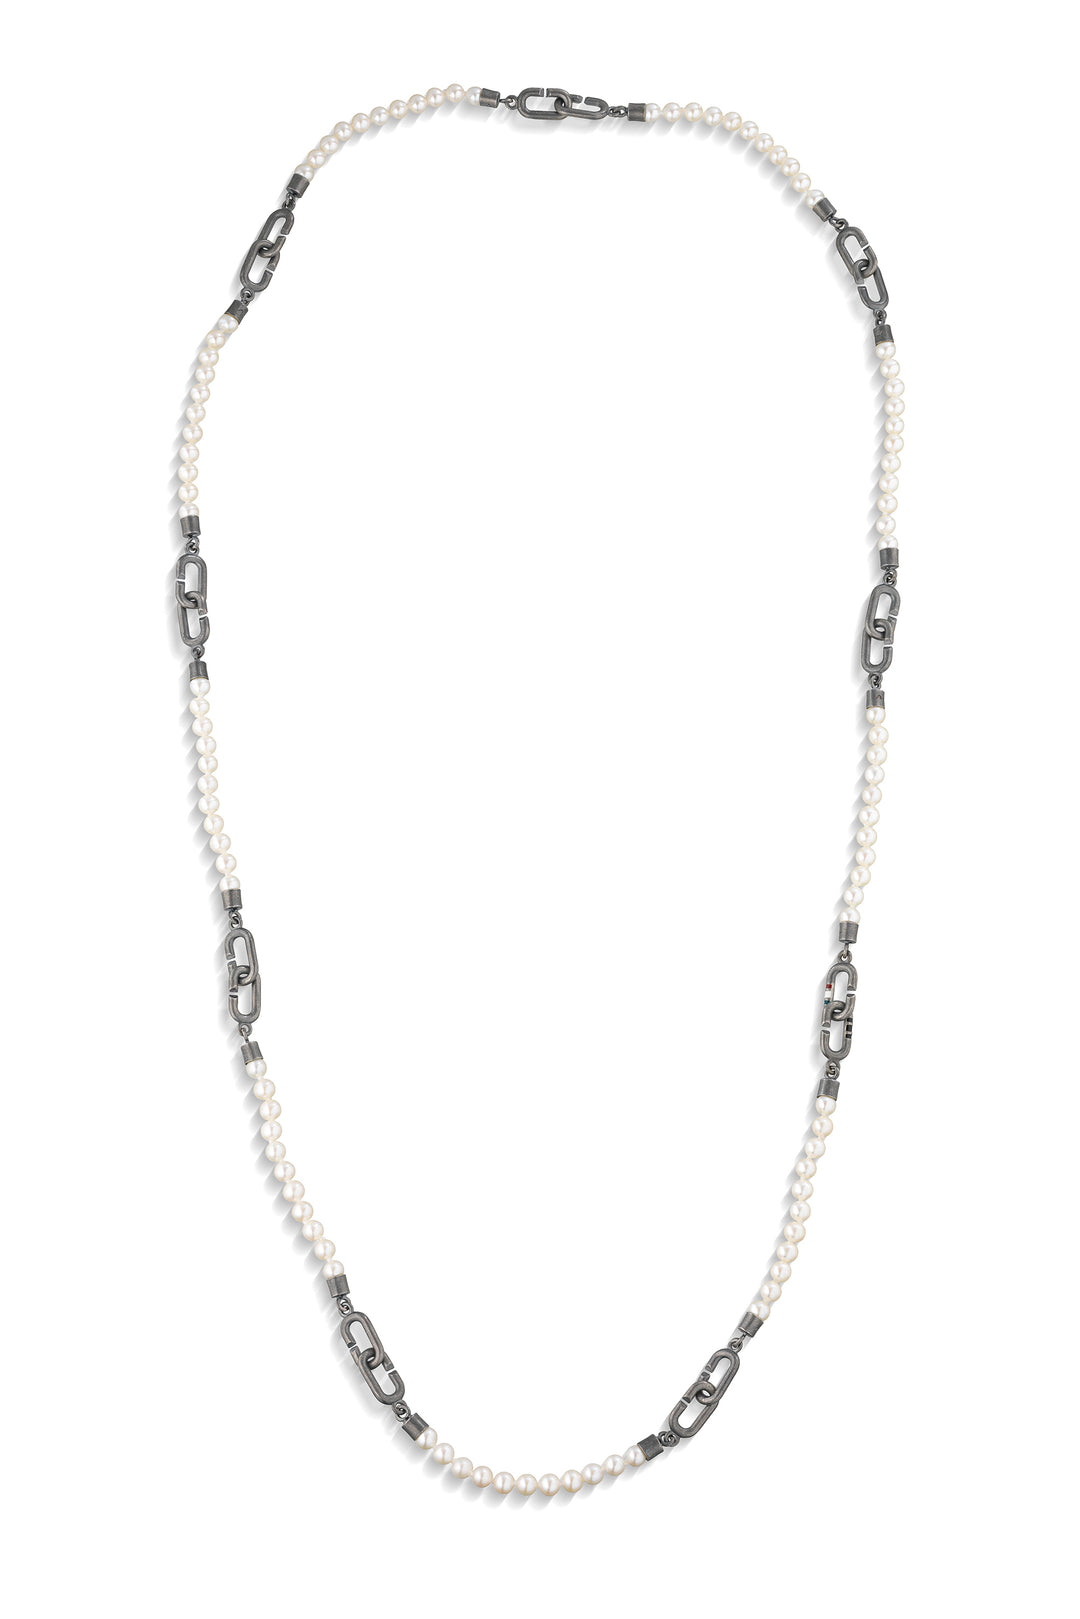 THE LINK Beaded Pearl Chain